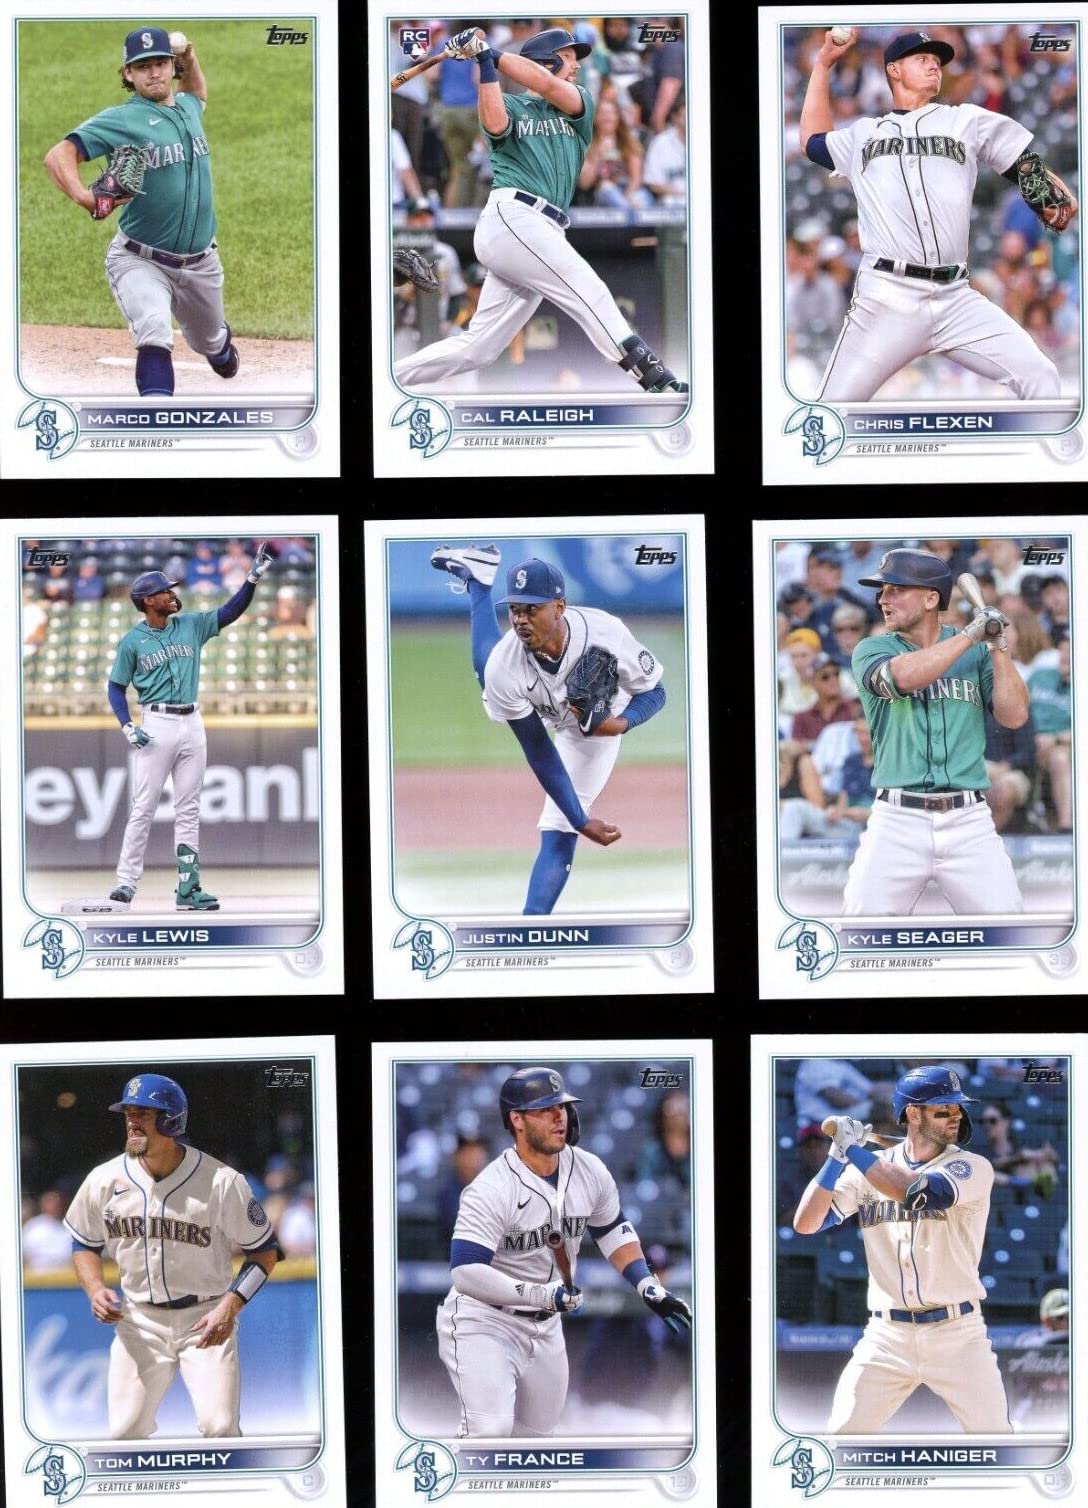 Seattle Mariners / 2022 Topps Baseball Team Set (Series 1 and 2